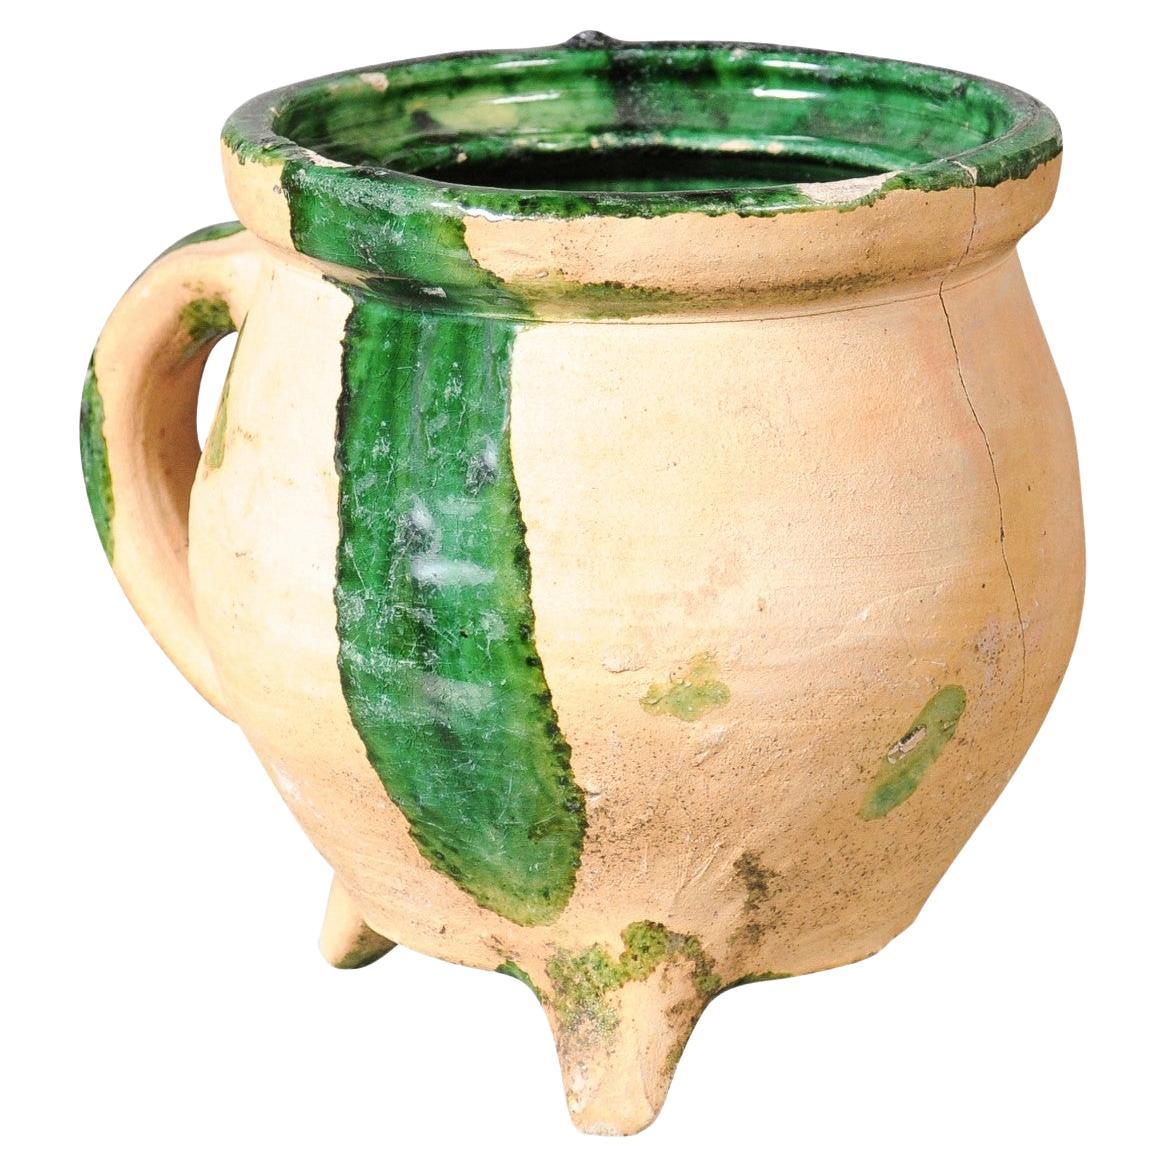 French Provincial 19th Century Pottery Cooking Pot with Partial Green Glaze For Sale